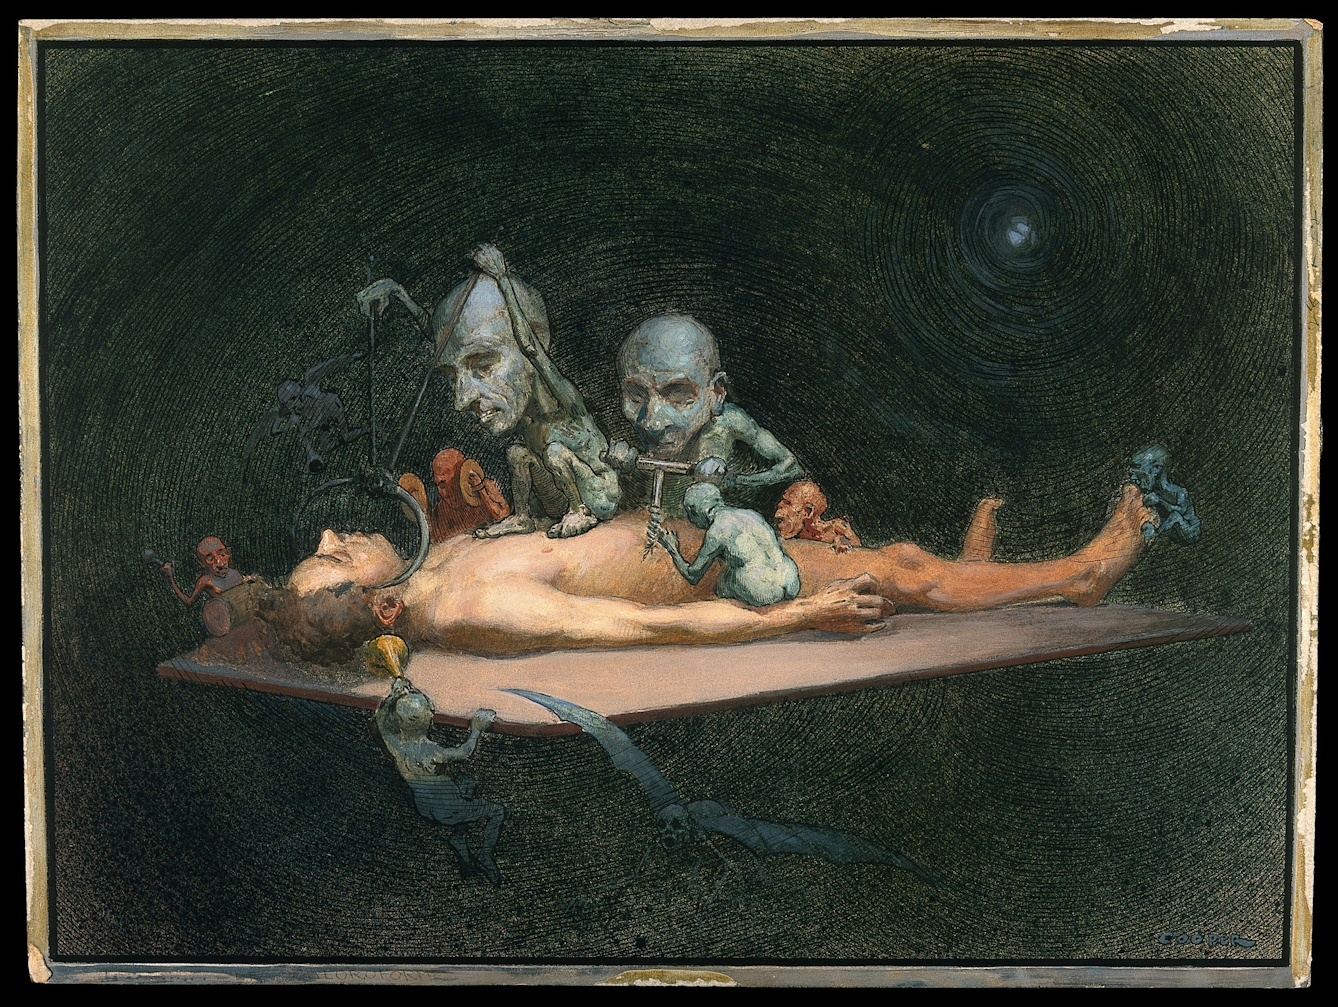 Watercolour painting showing an unconscious naked man lying on a table being attacked by little demons armed with surgical instruments